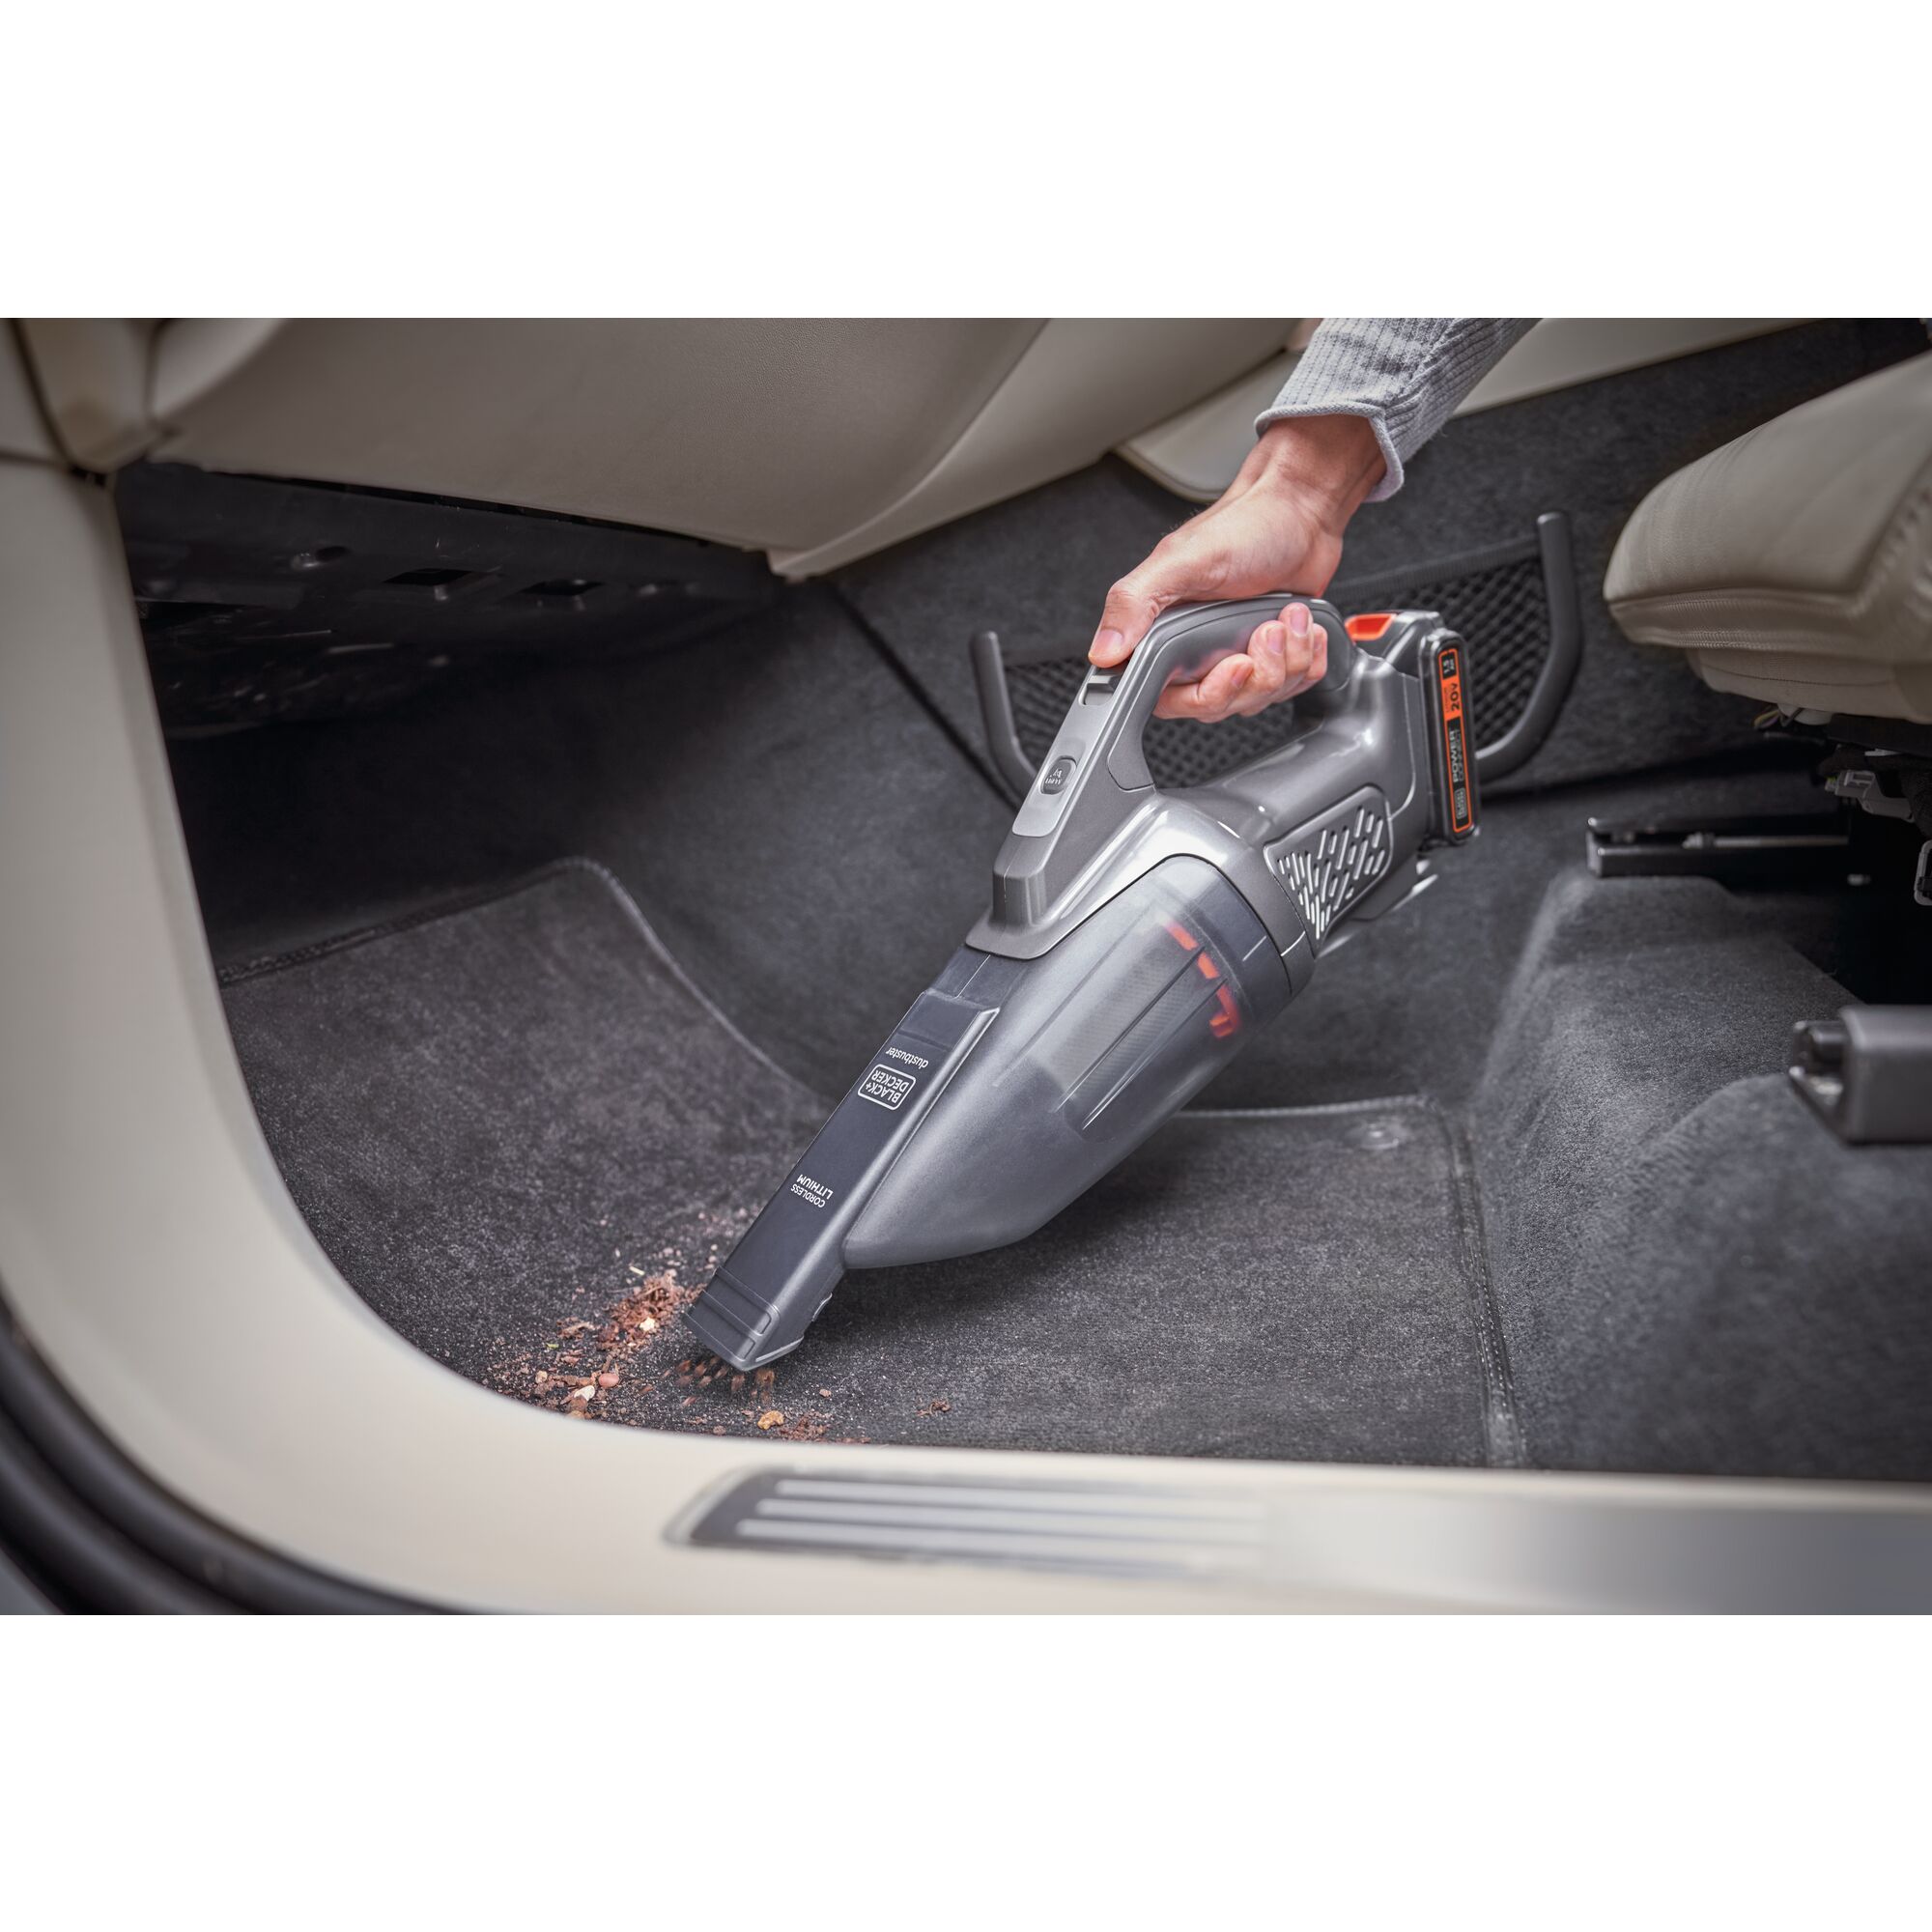 Black and decker Dustbuster 20V MAX* POWERCONNECT Cordless Handheld Vacuum being used to clean up a mess from a car floor